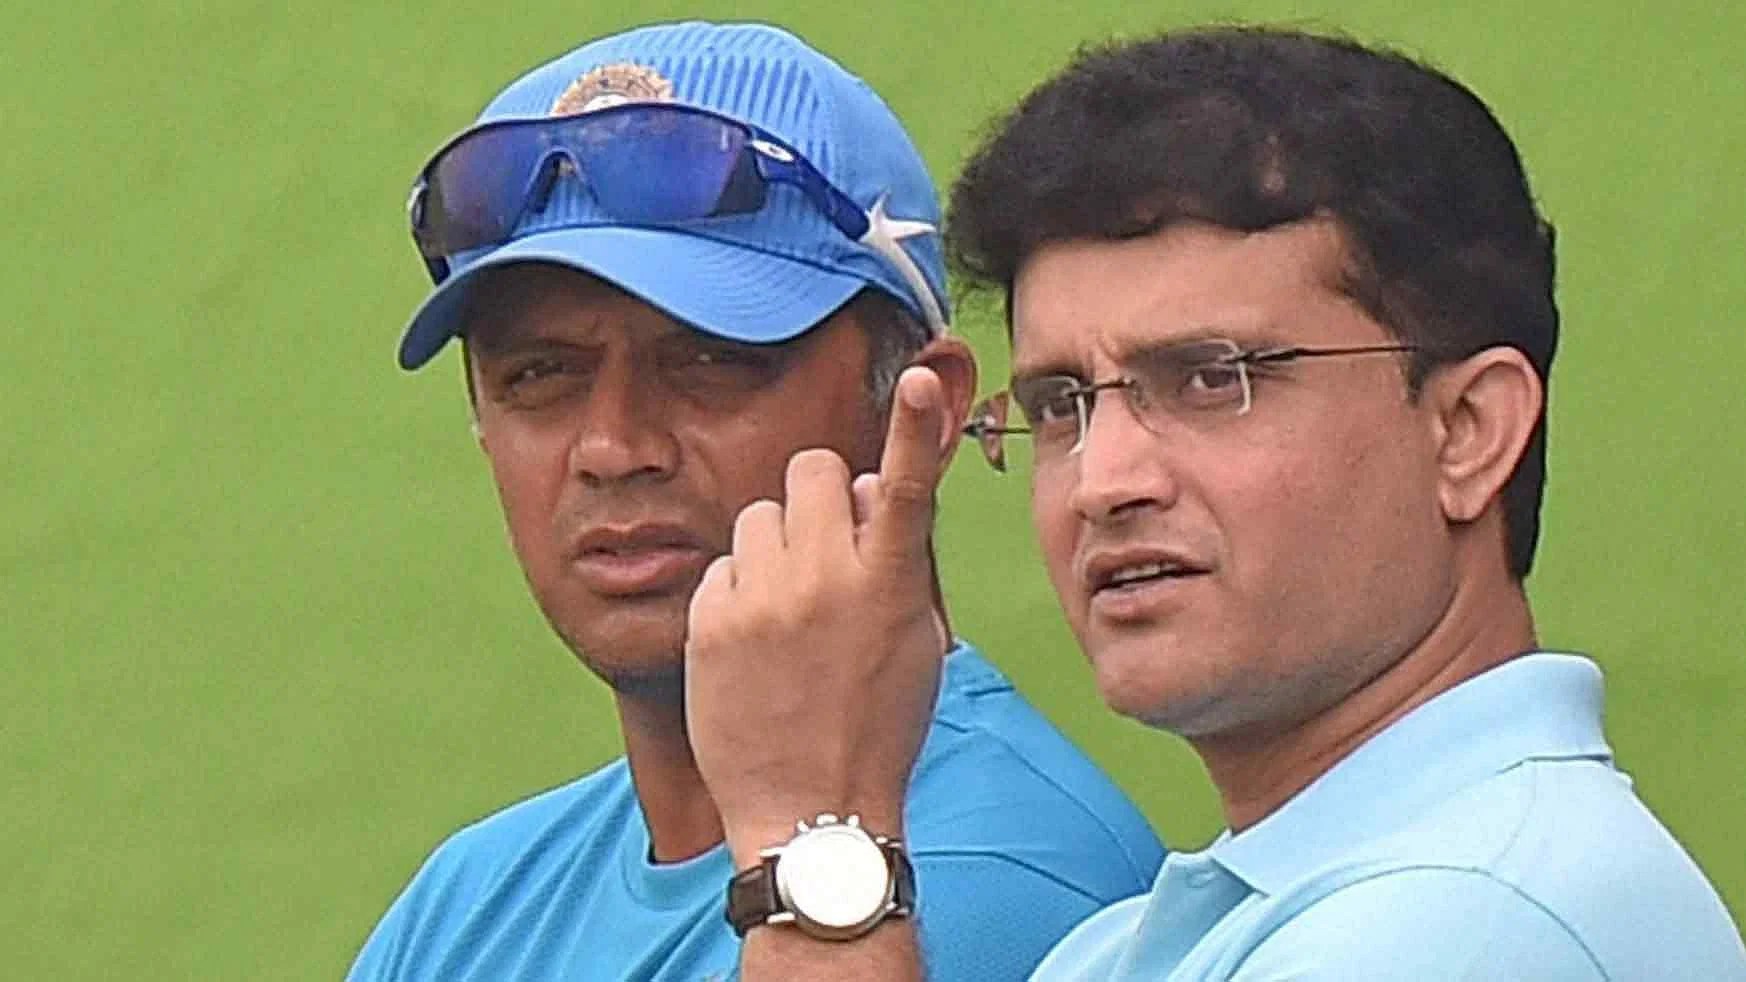 IND vs AUS Test Series: Ex-BCCI president Sourav Ganguly DISMISSES Rahul Dravid criticism amid talks of Indian Cricket Overhaul, says 'Give some time, he will turn this team around' - Check out